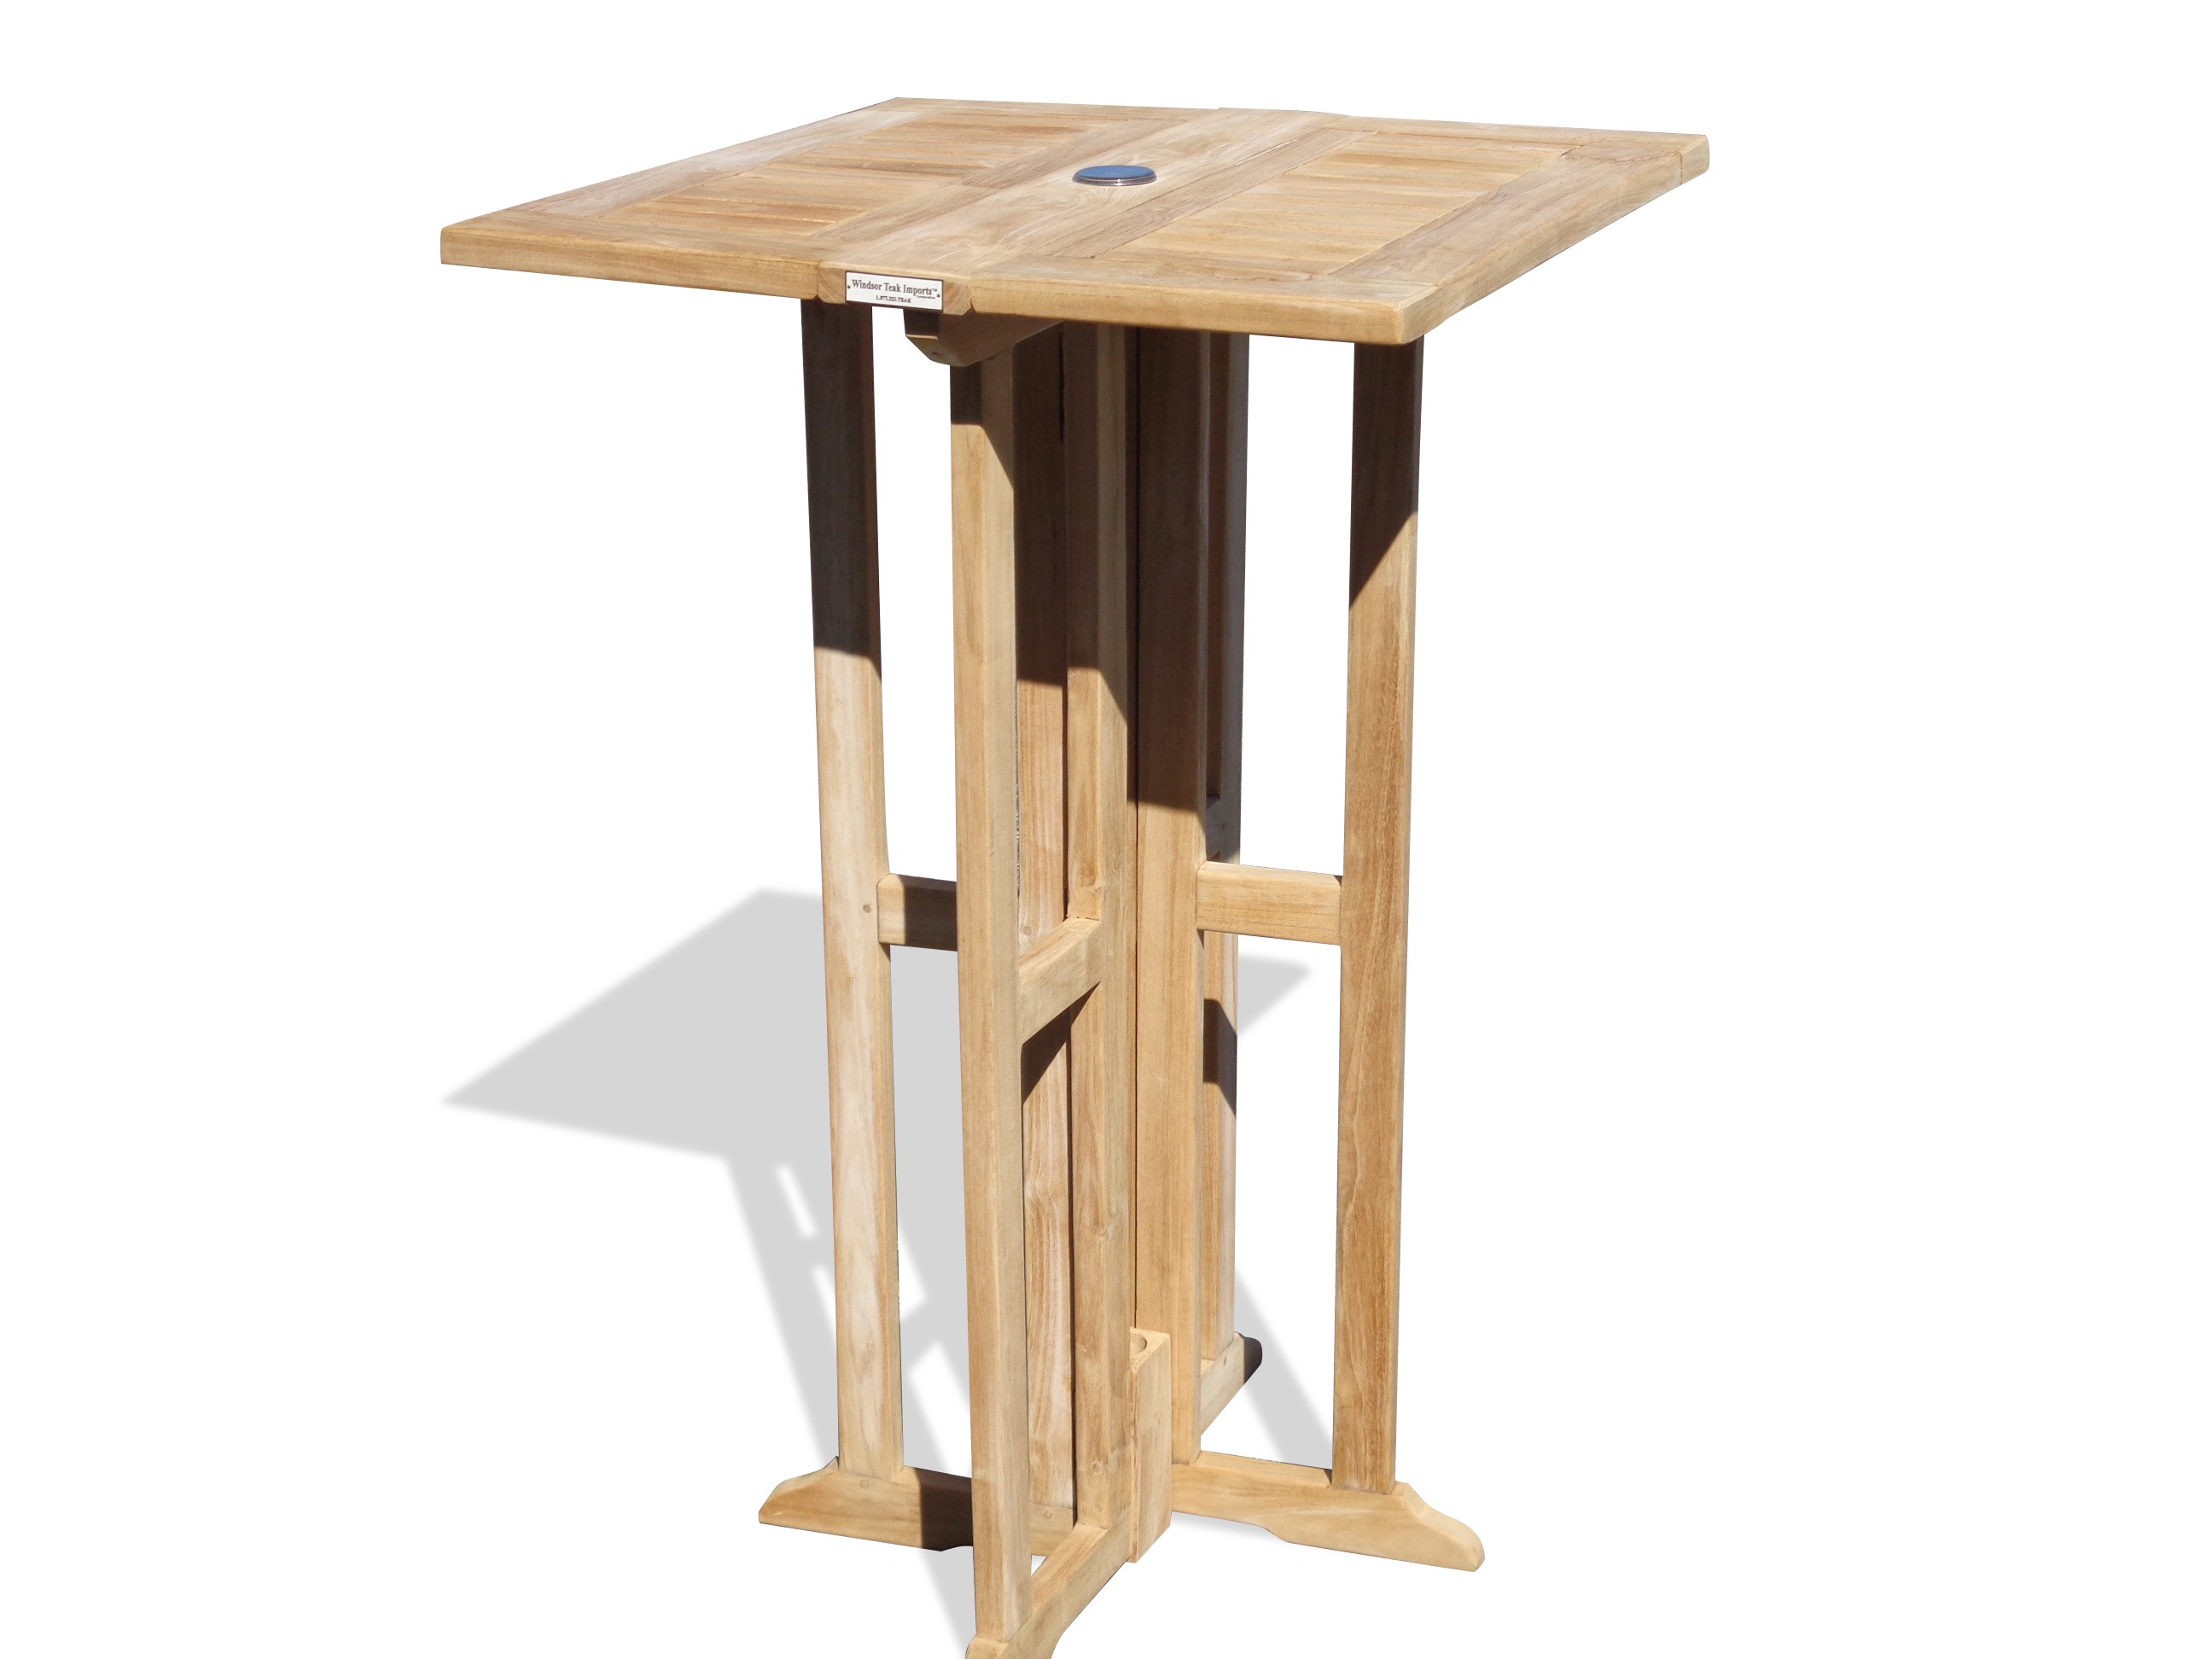 Bimini 27" Square Drop Leaf Teak Folding Counter Table ...use with 1 Leaf Up or 2.... Makes 2 different tables (Counter height is 5" lower than bar)